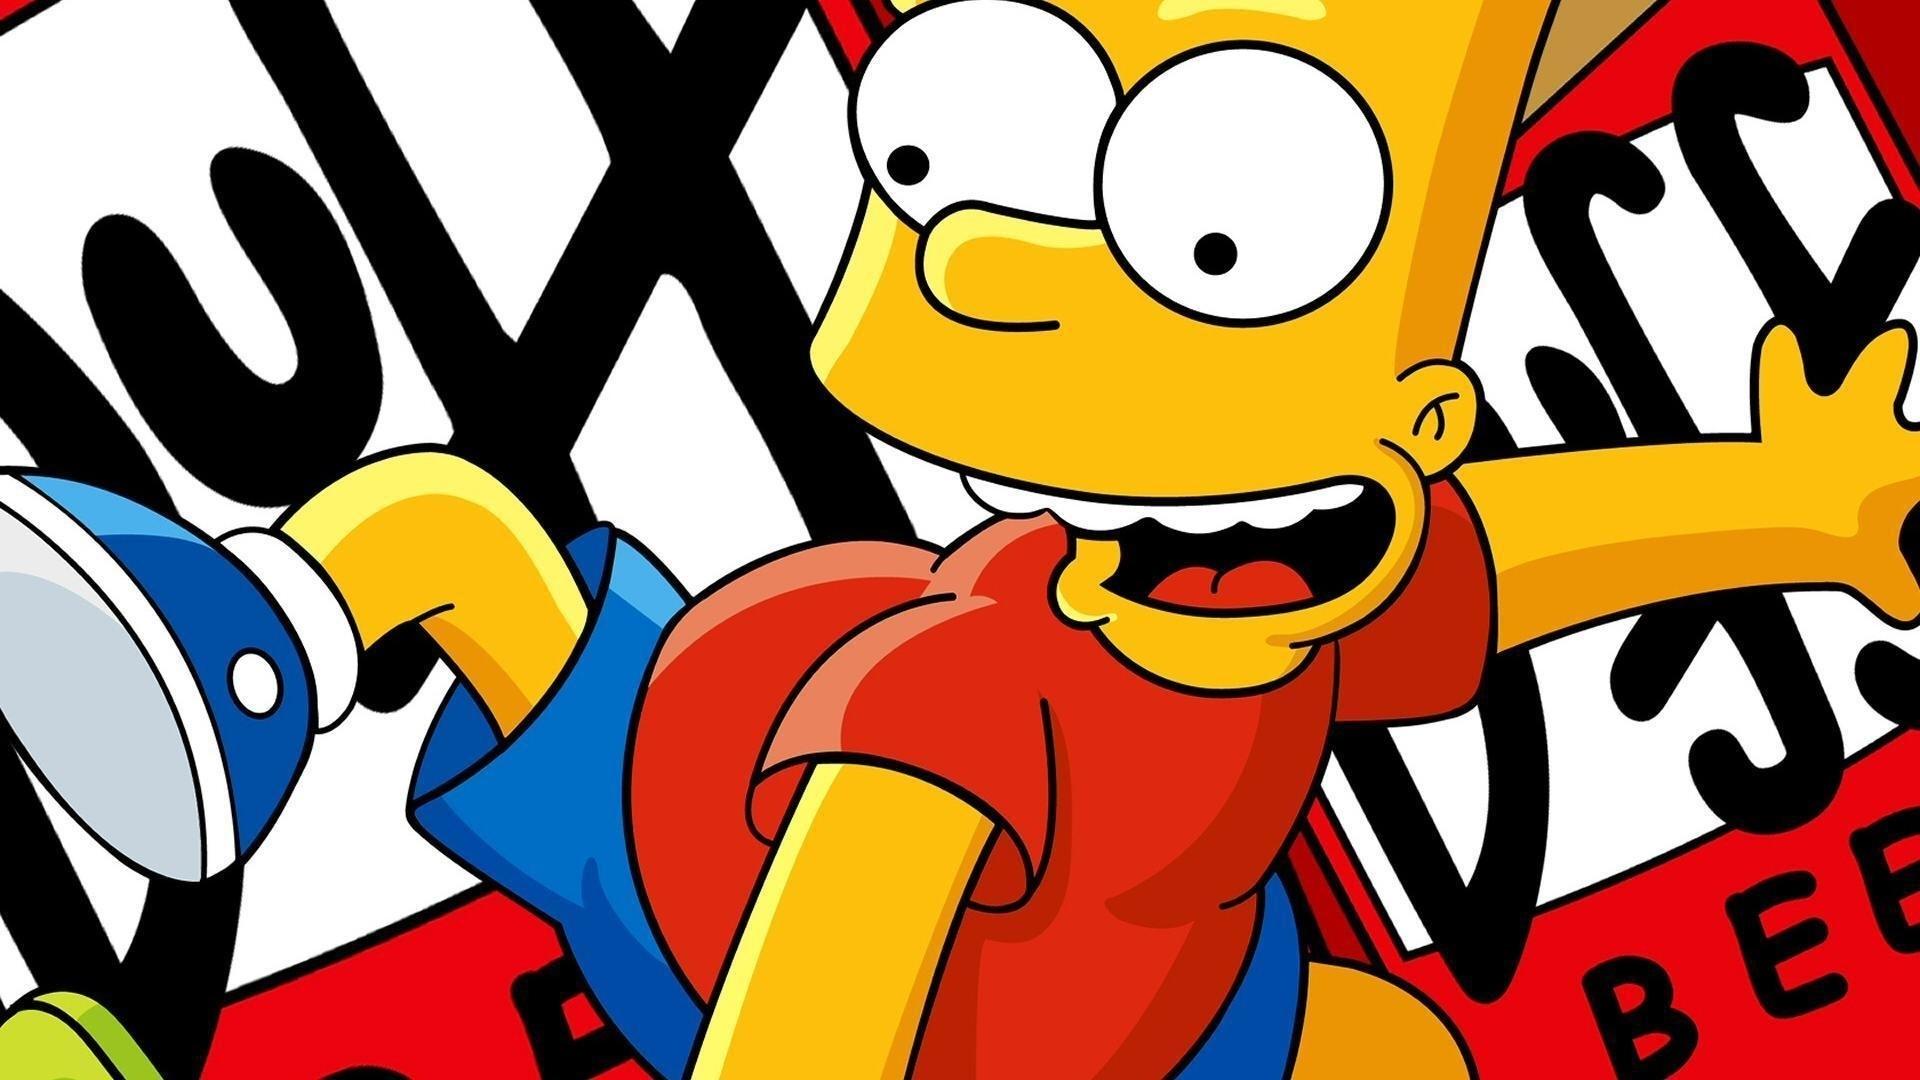 Download 1920x1080 Cartoons the simpsons bart simpson duff